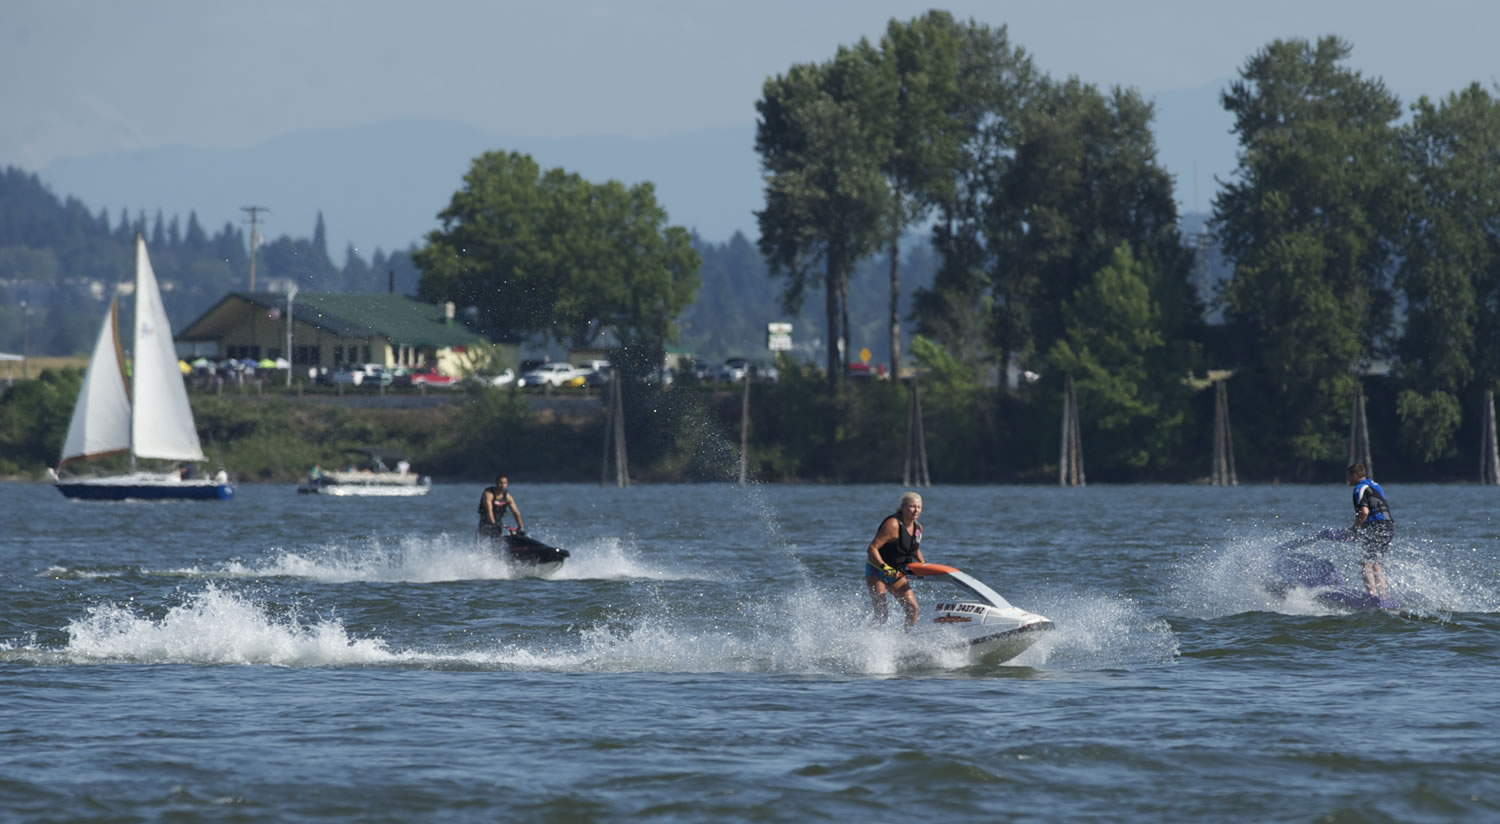 Steven Lane/The Columbian
Personal watercraft riders keep cool Friday by playing on the Columbia River.